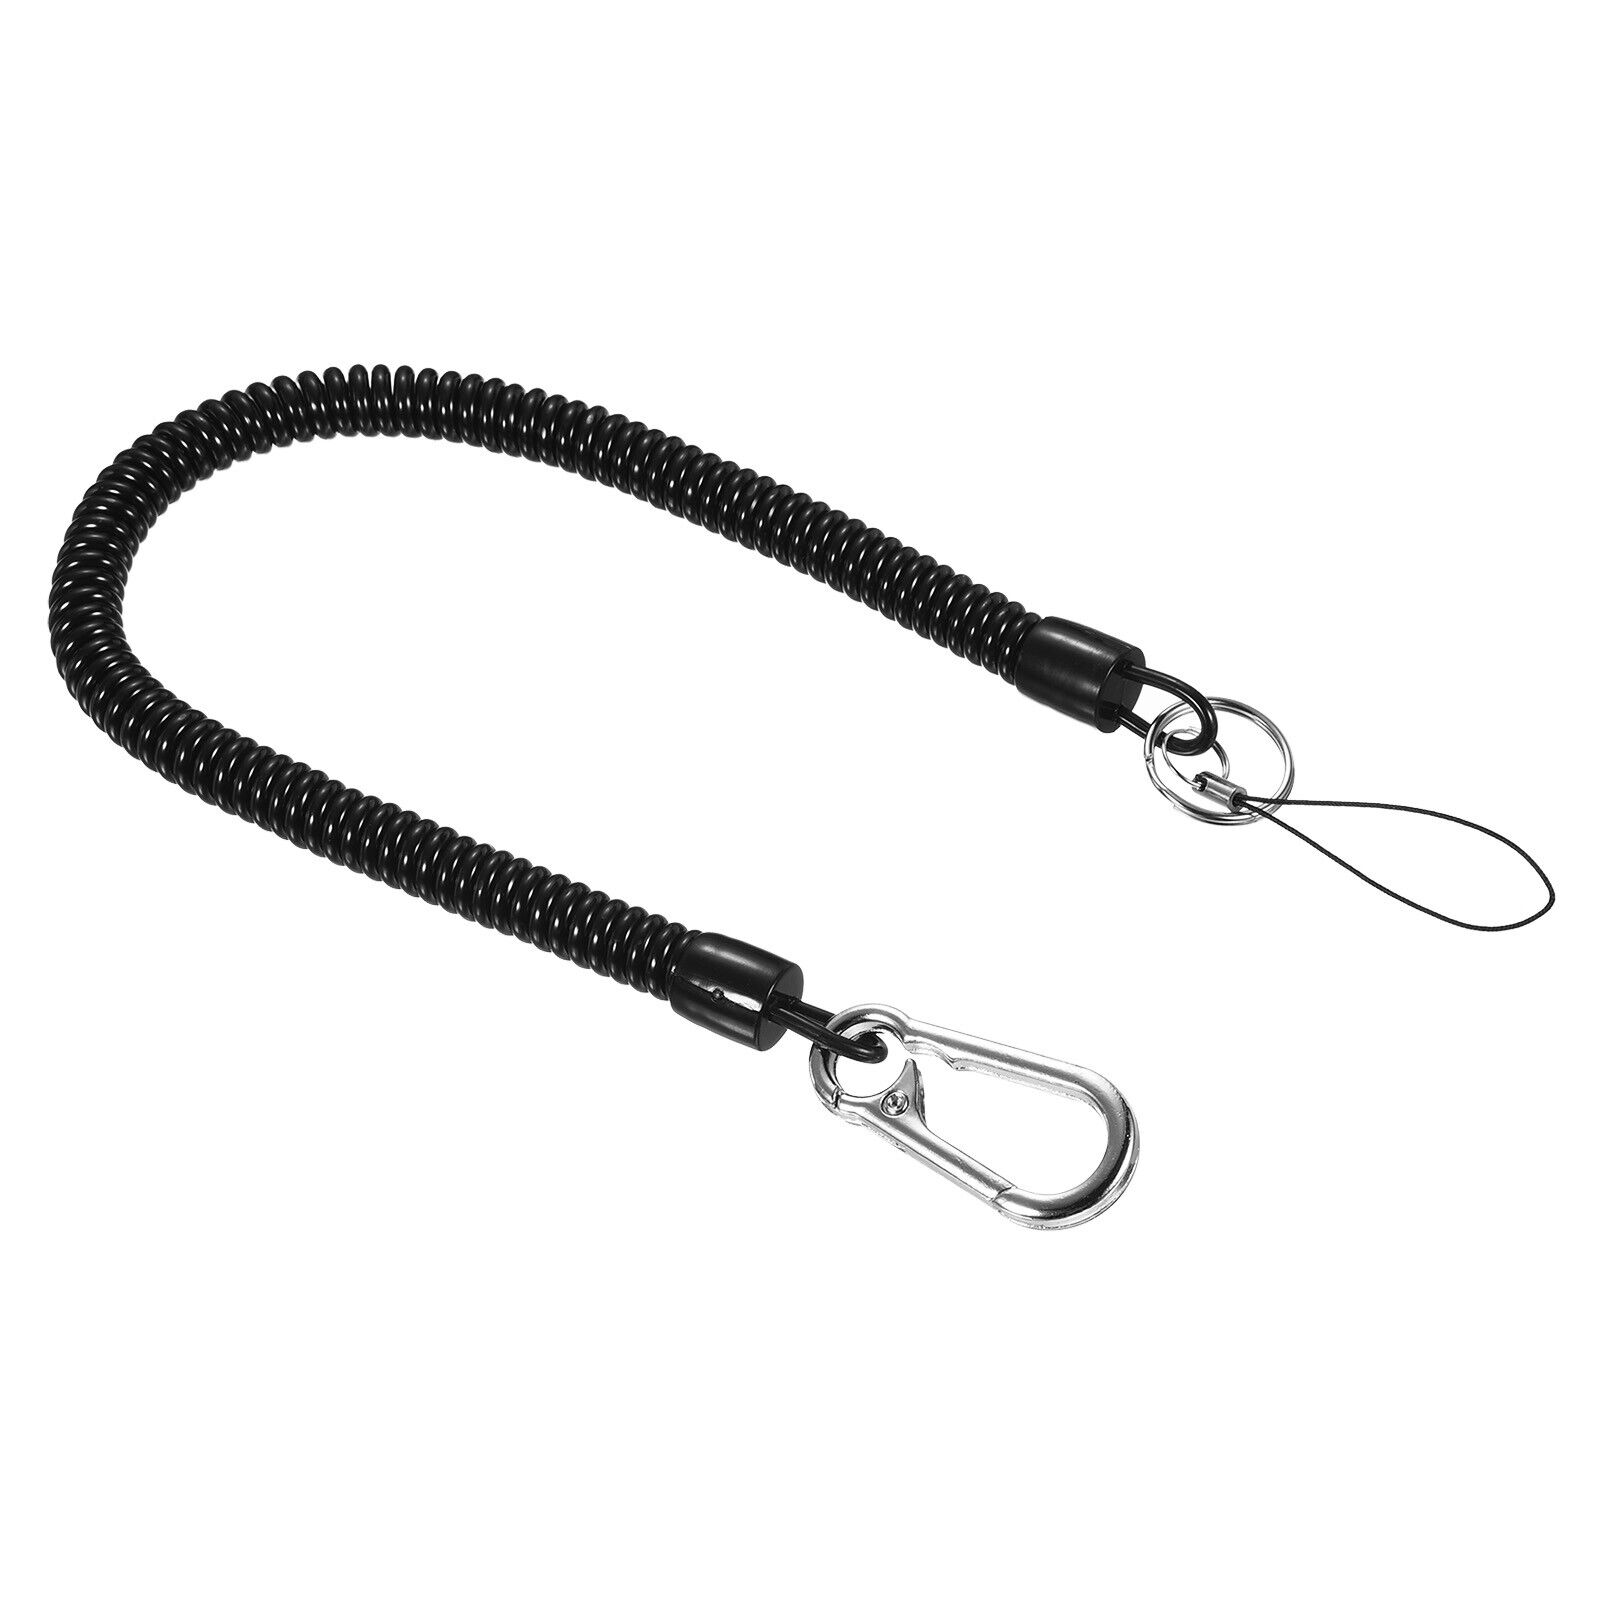 Retractable Coil Spring Keychain with Big Ring 380mm, 1 Pack Plastic Black